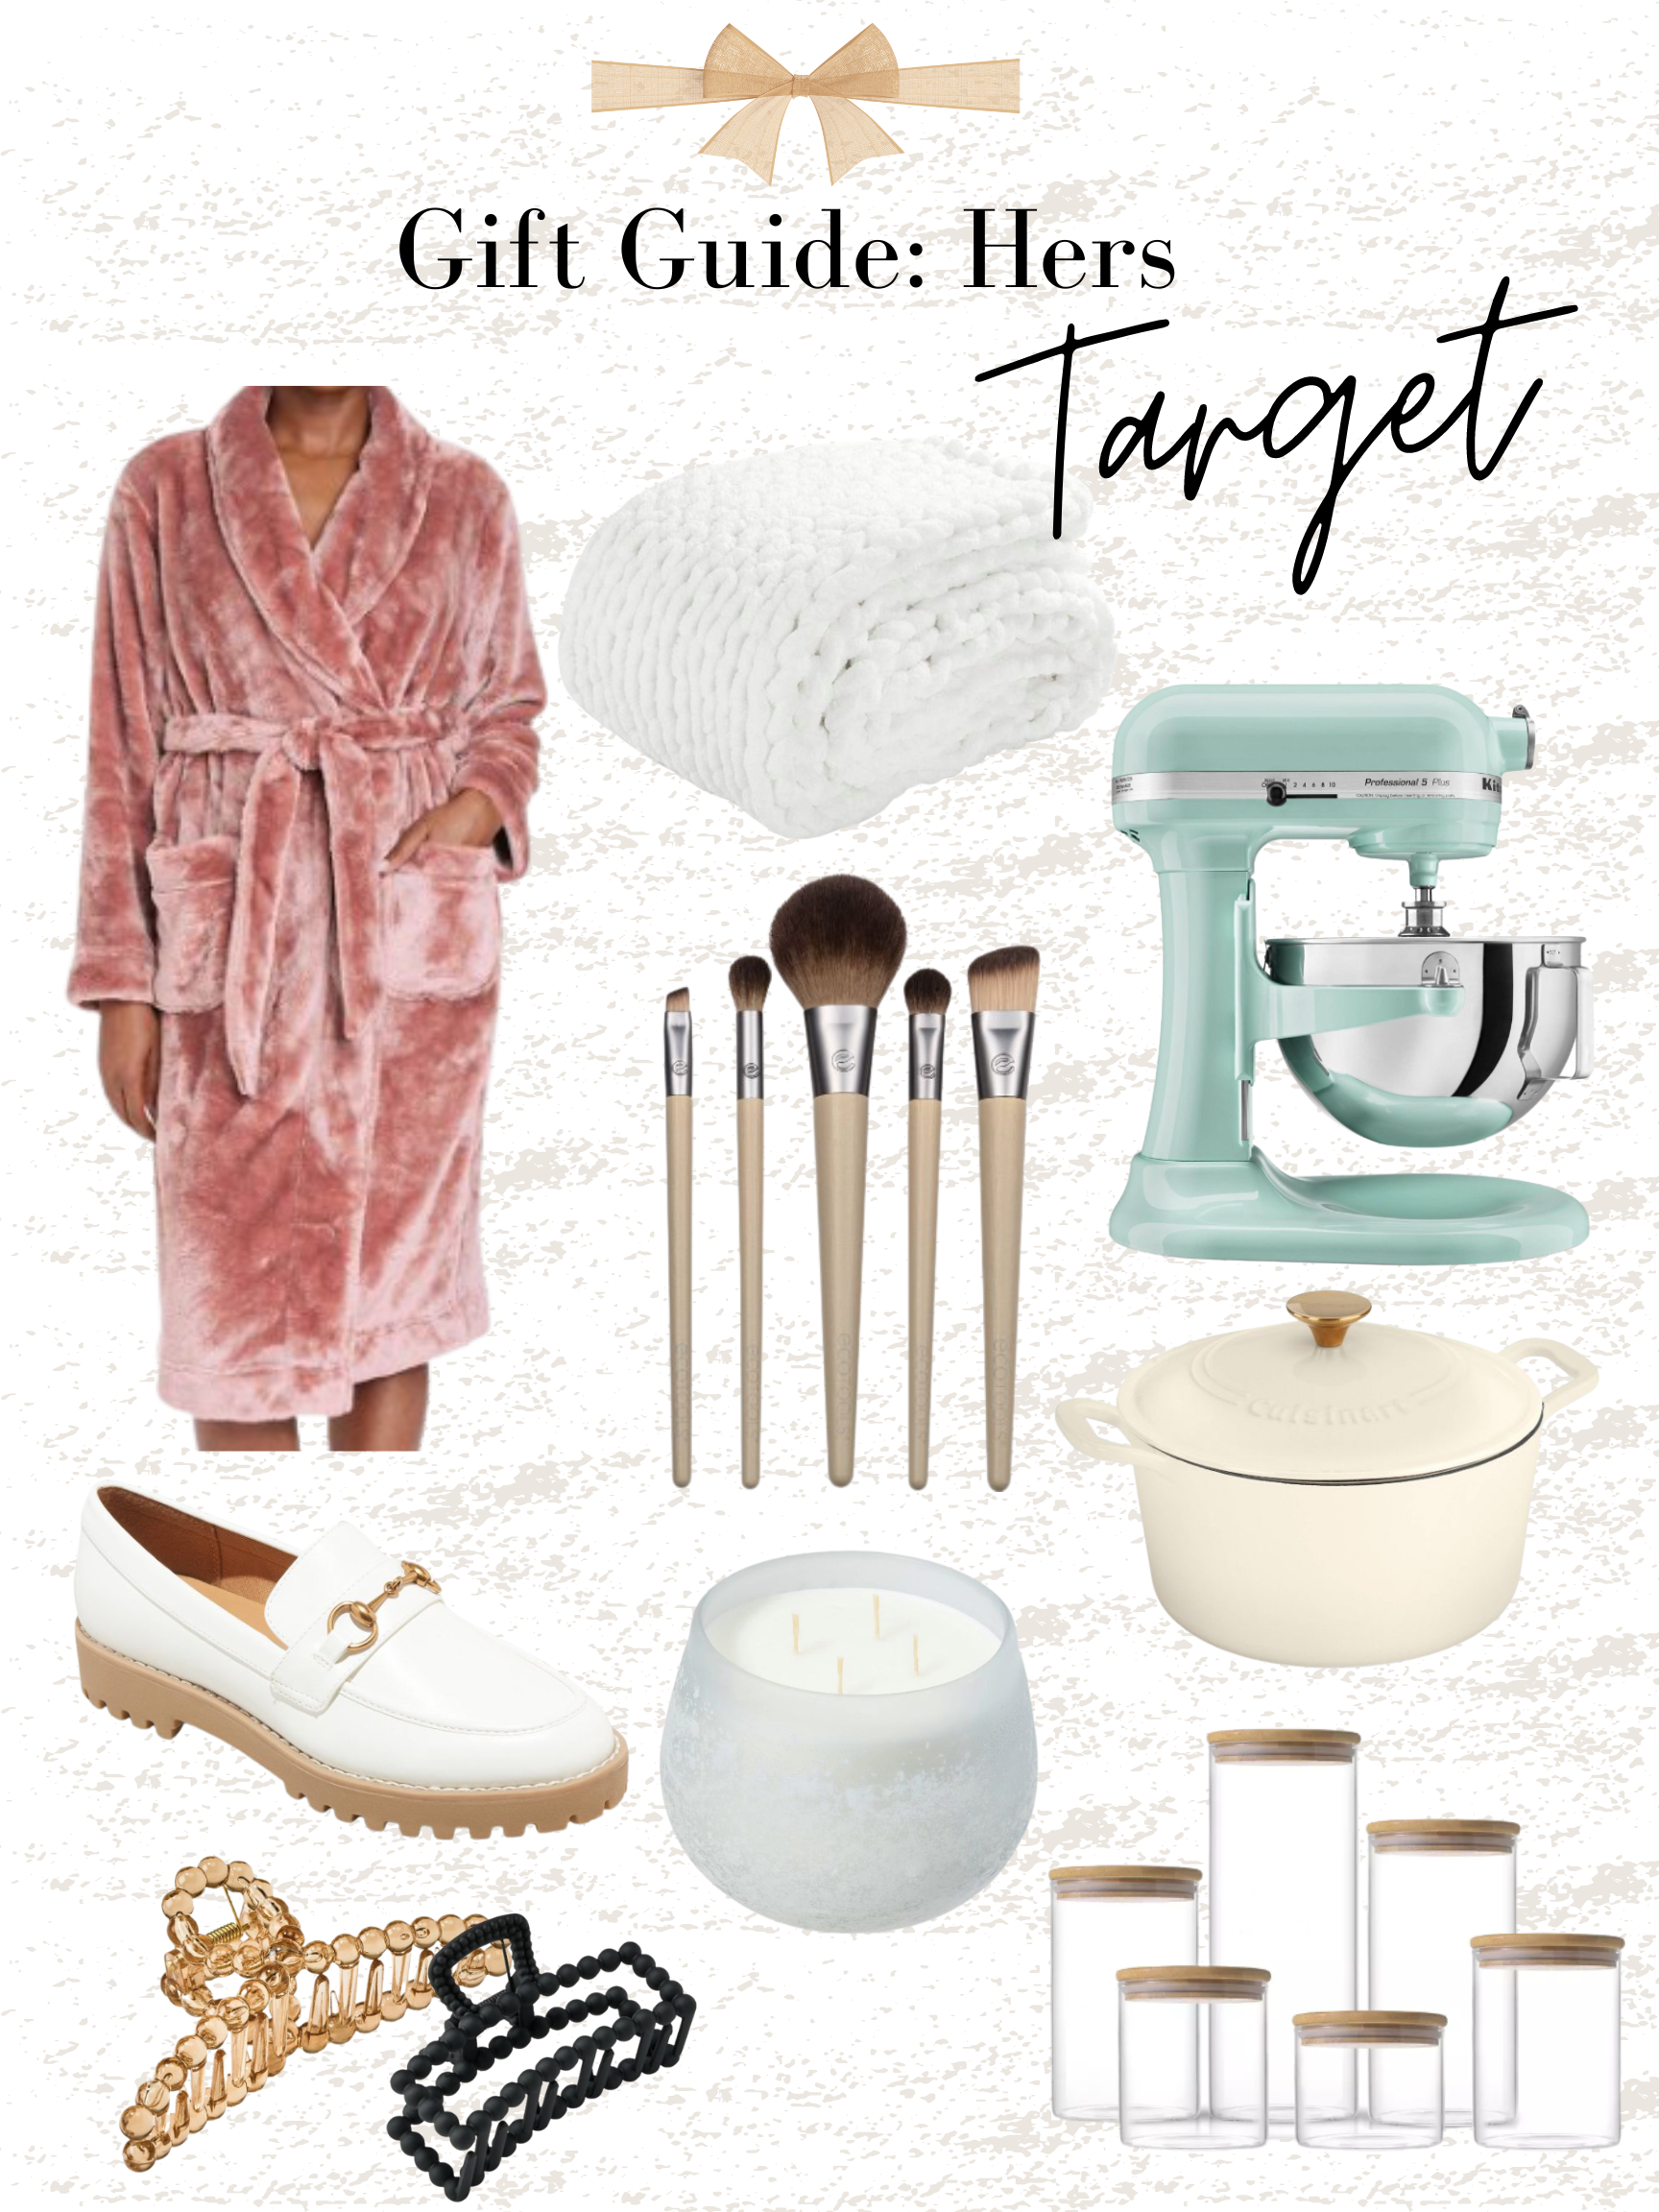 Target Gift Guide: His & Hers